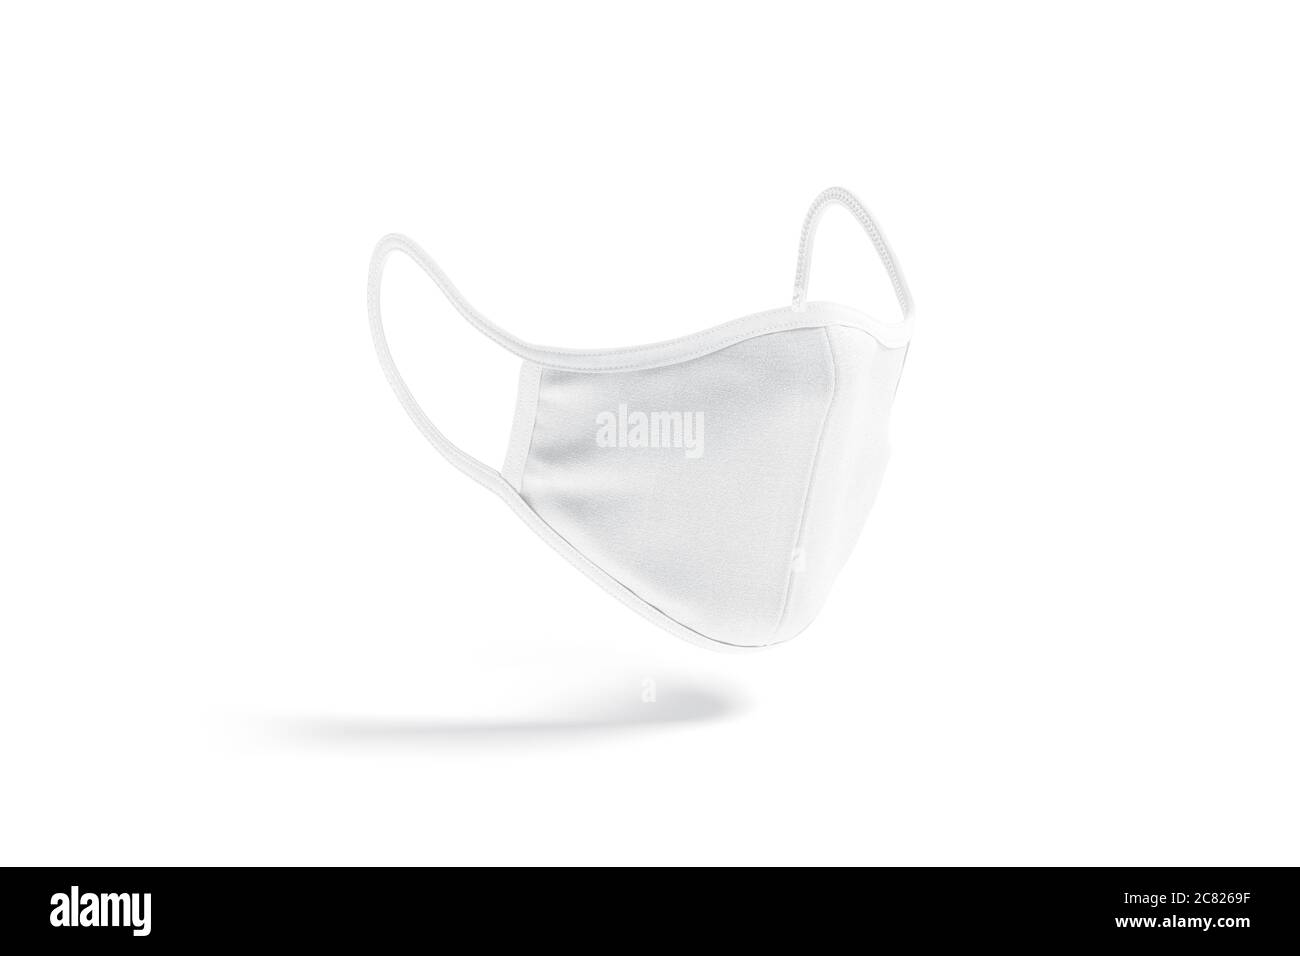 Download Blank White Fabric Face Mask Mockup Side View No Graity Stock Photo Alamy PSD Mockup Templates